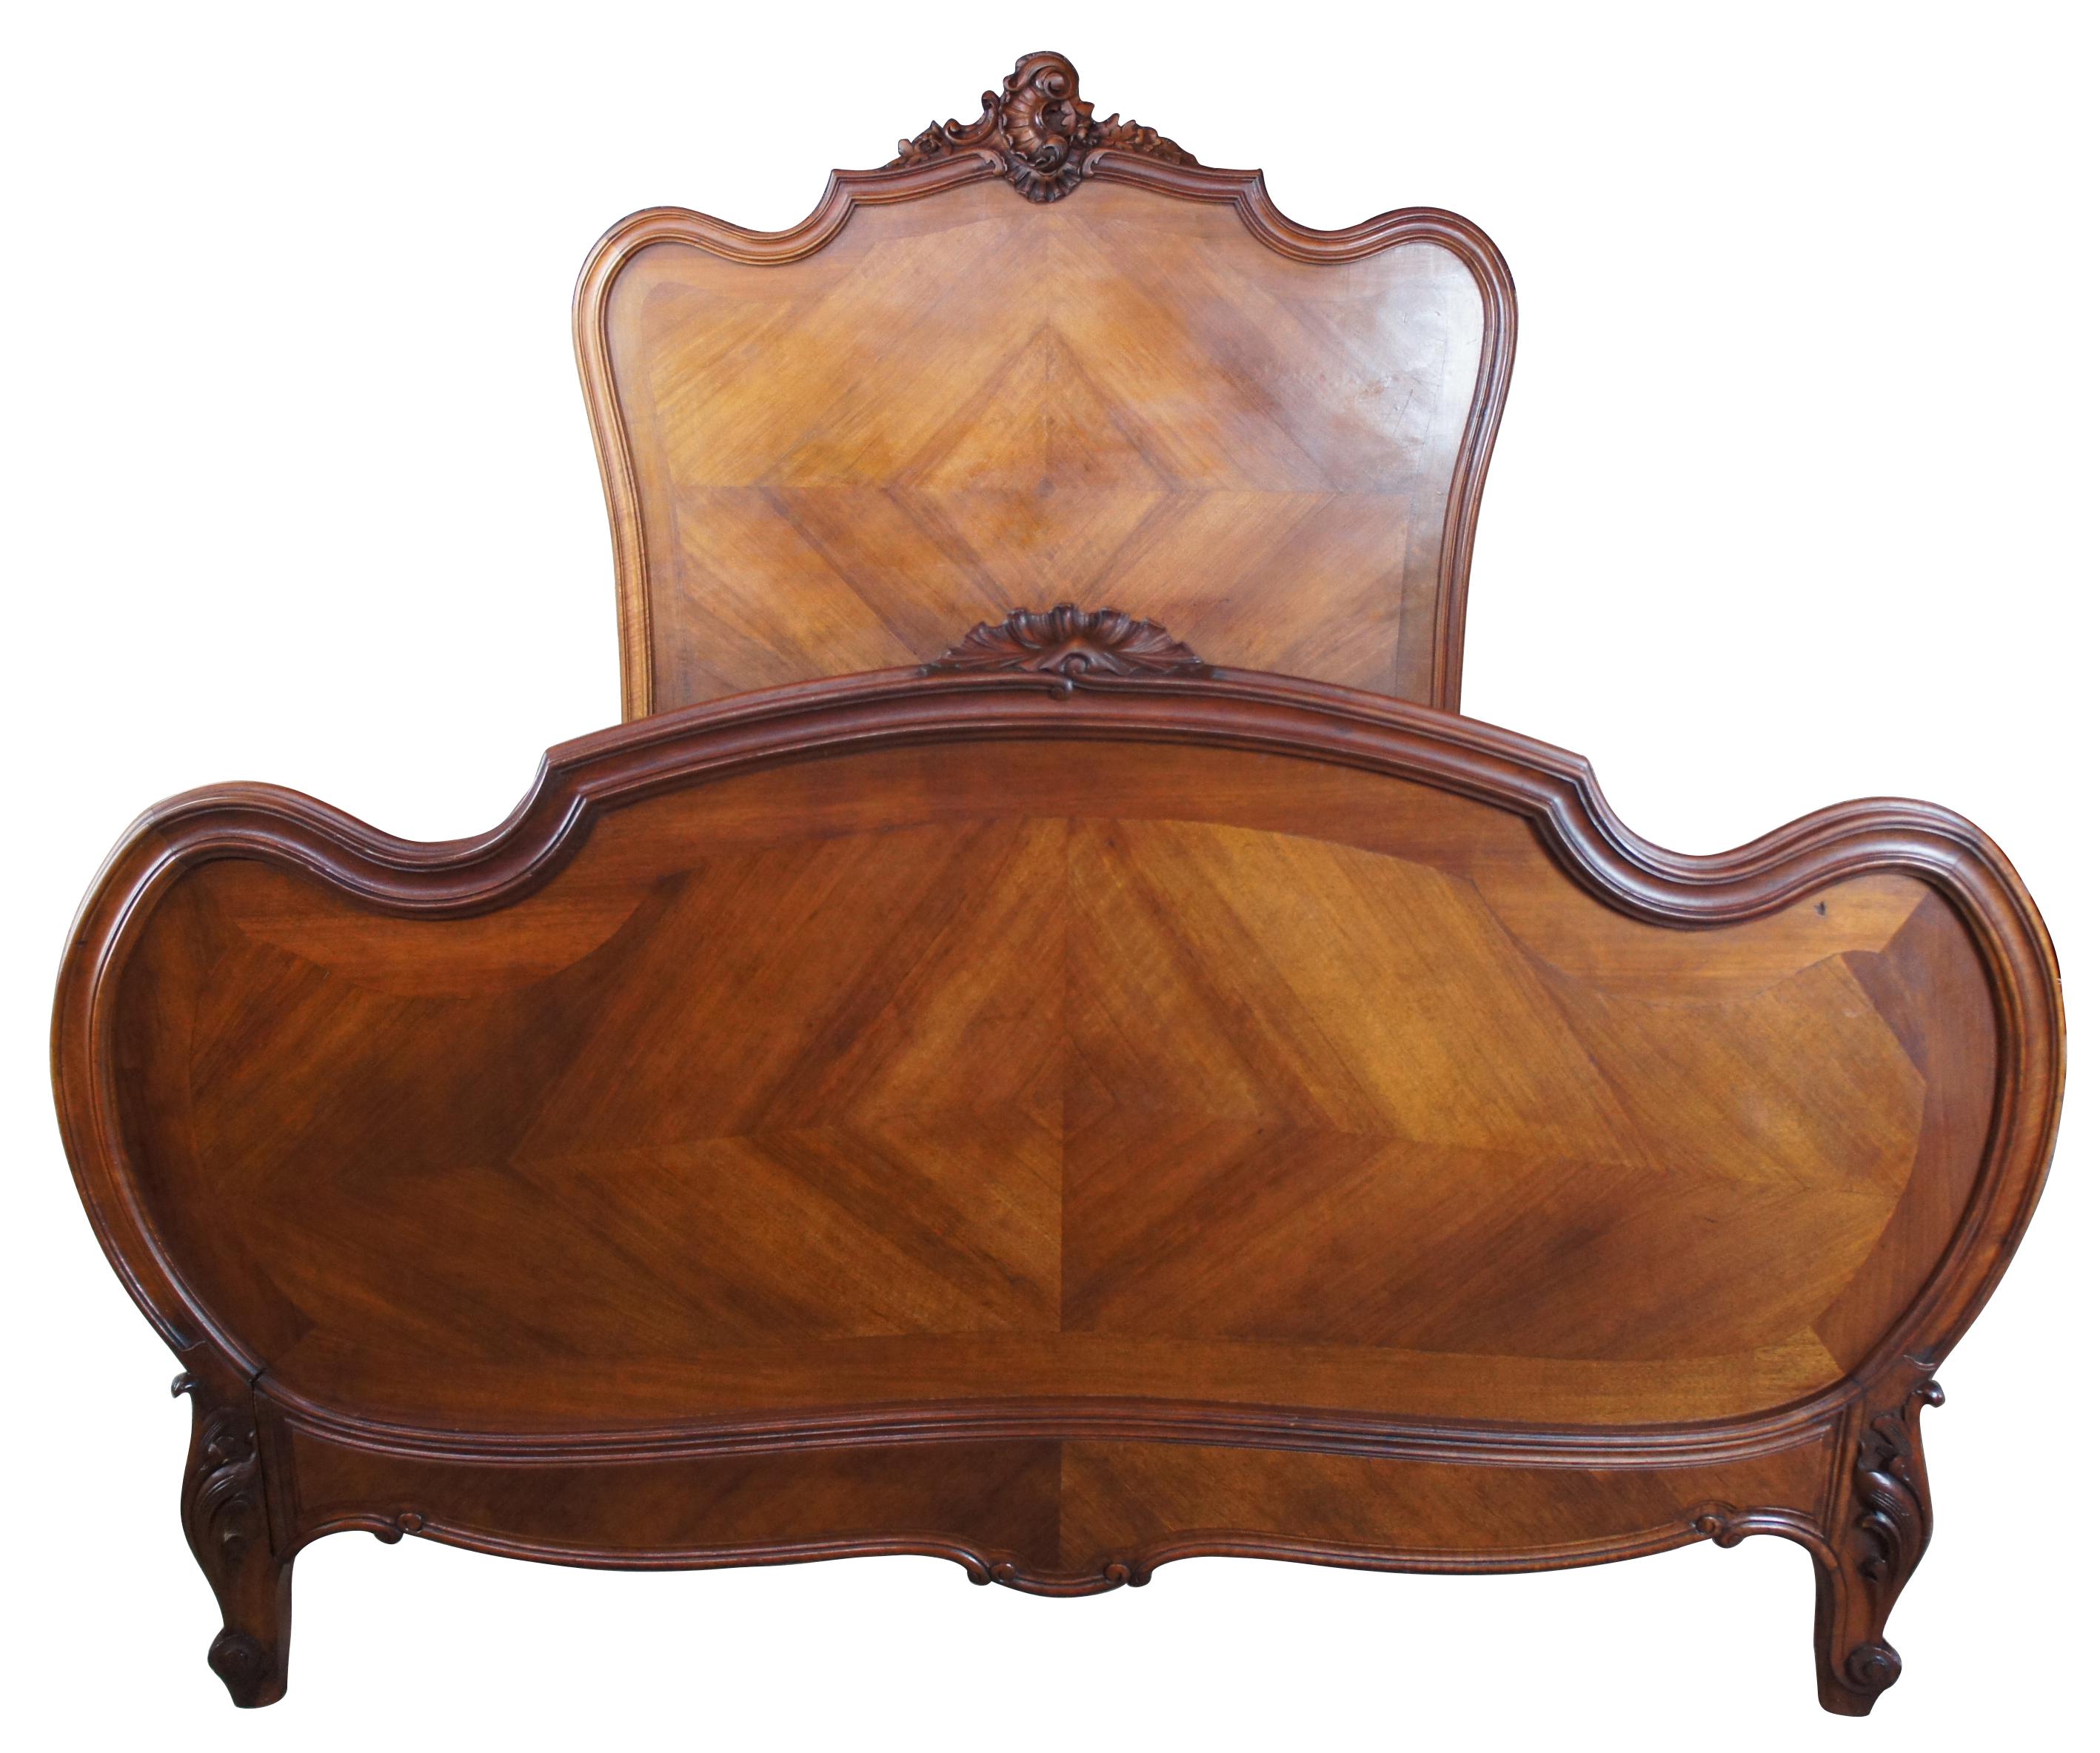 Mid 19th century French or Rococo Revival walnut bed. Features matchbook diamond pattern paneling with thick grooved trim and ornately carved floral and scalloped accents. This bed will fit a full size mattress as long as the box spring or wood